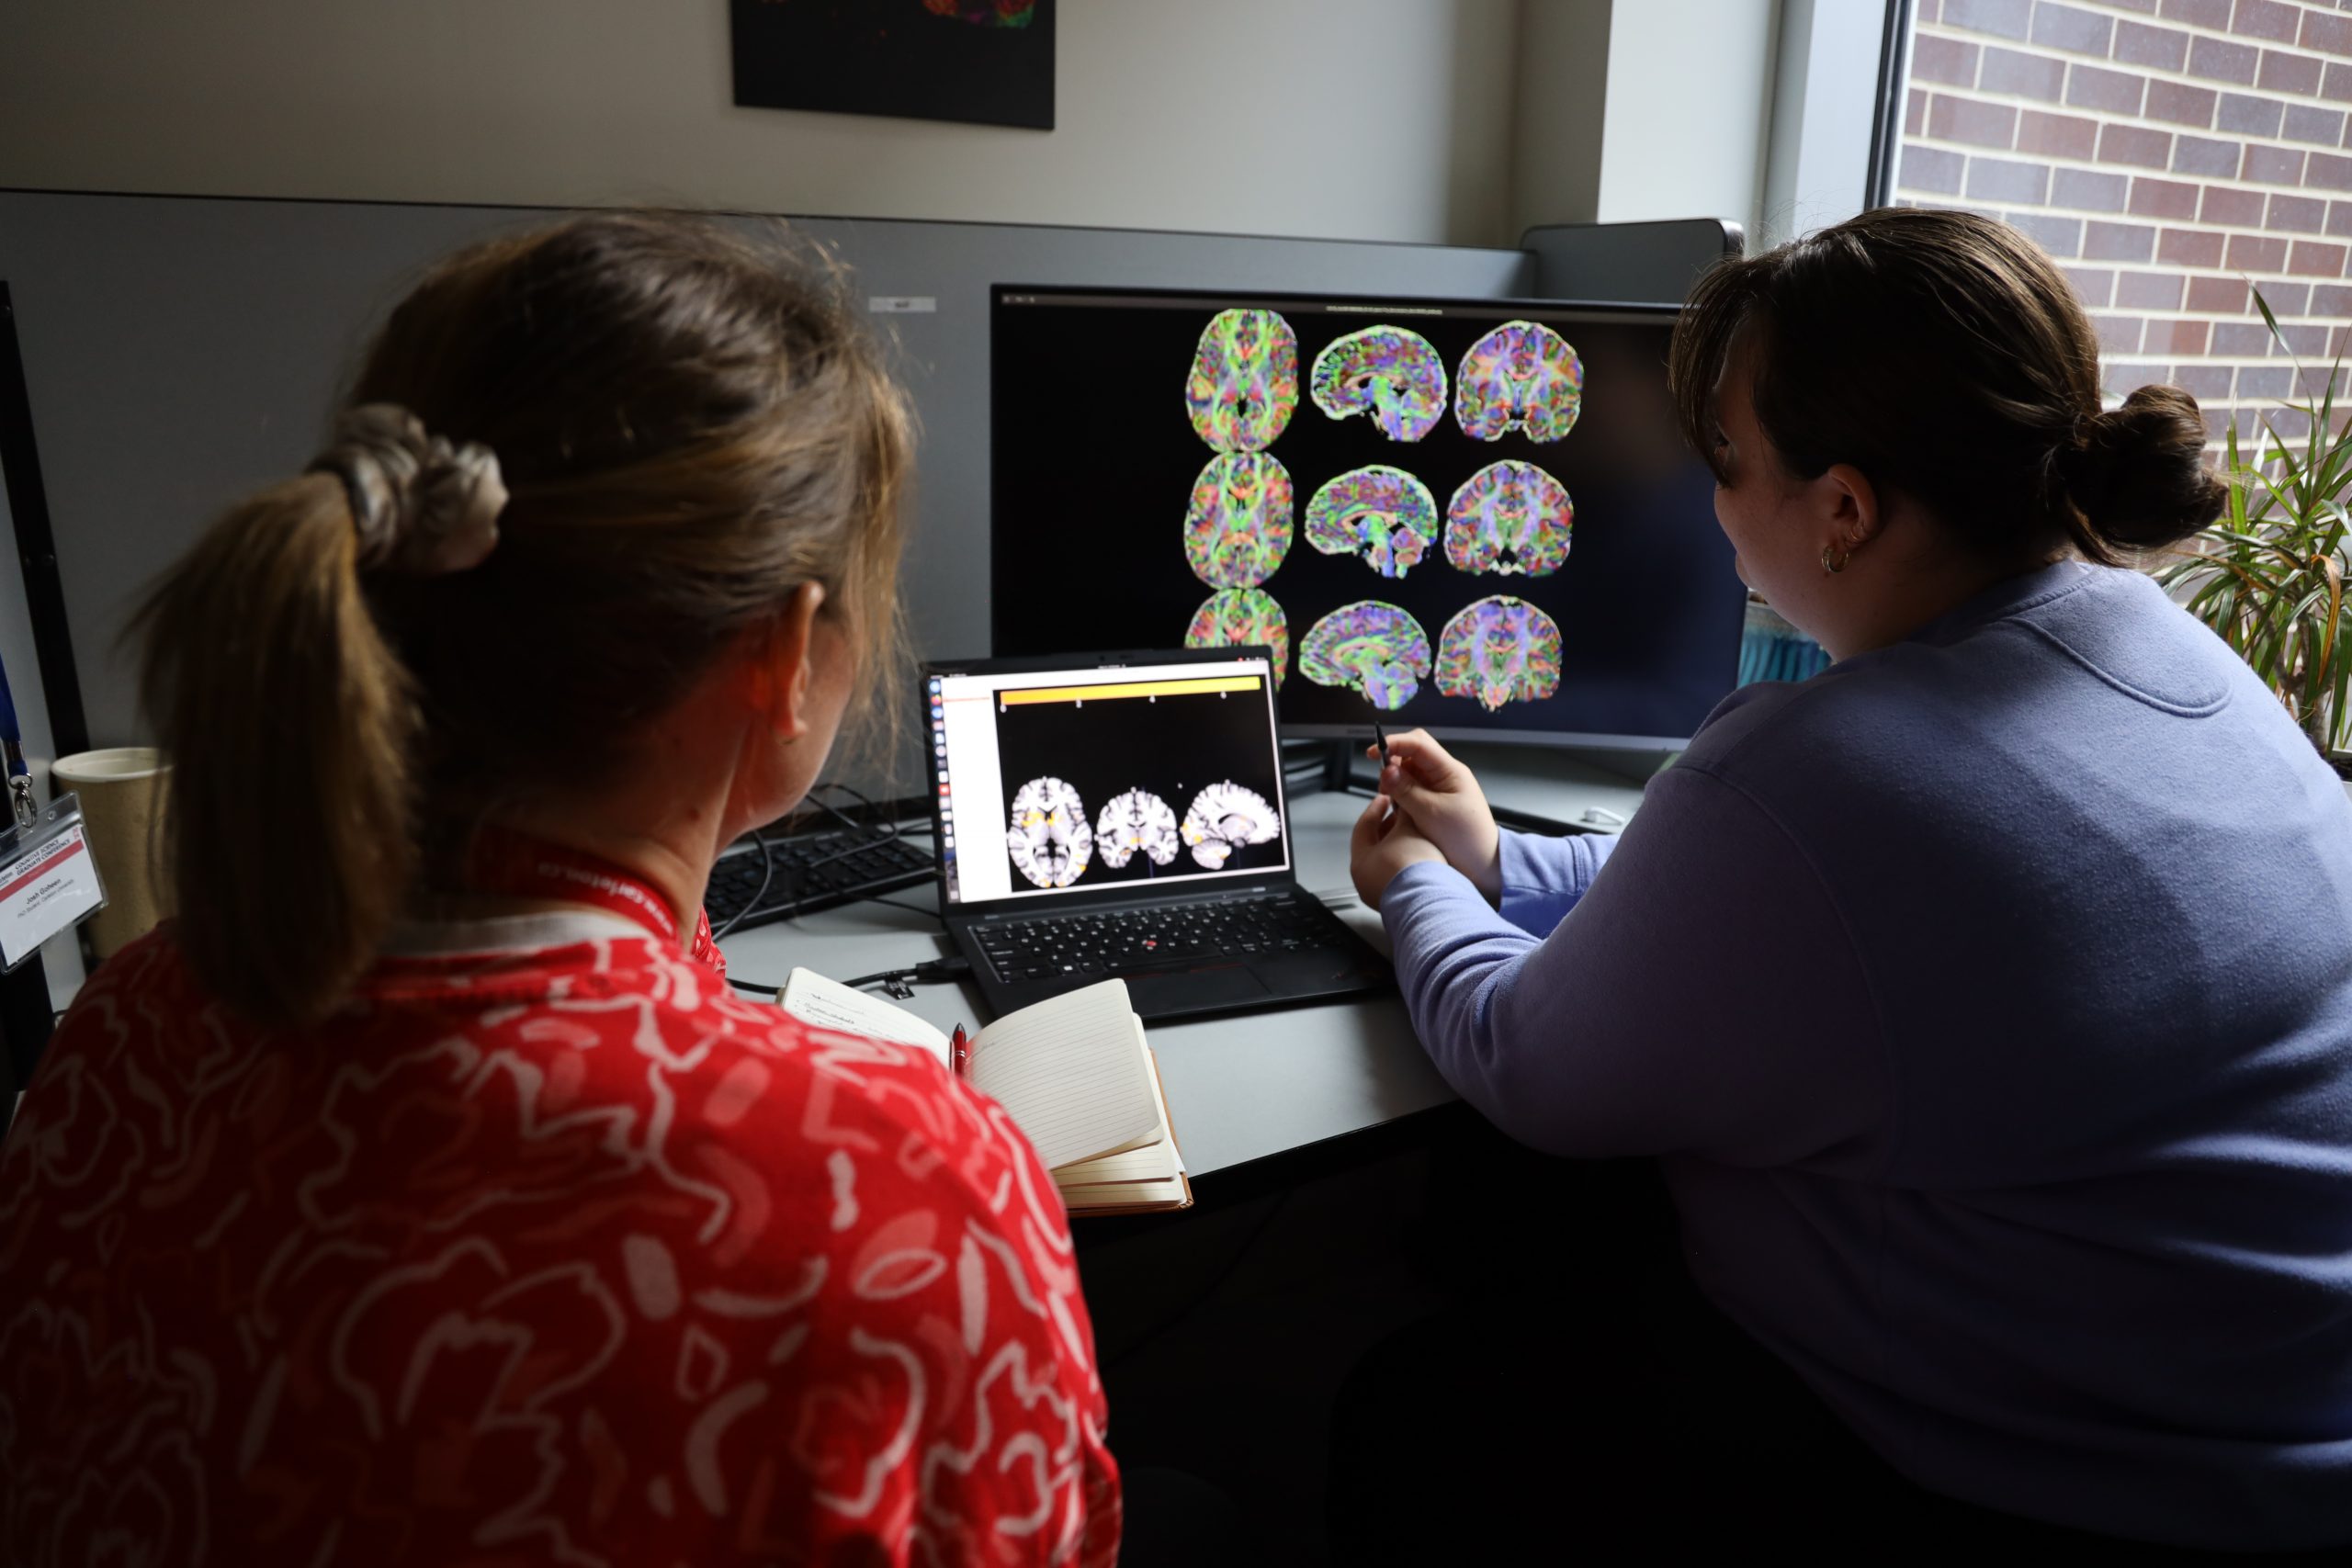 Two women observe a laptop with brain images on it